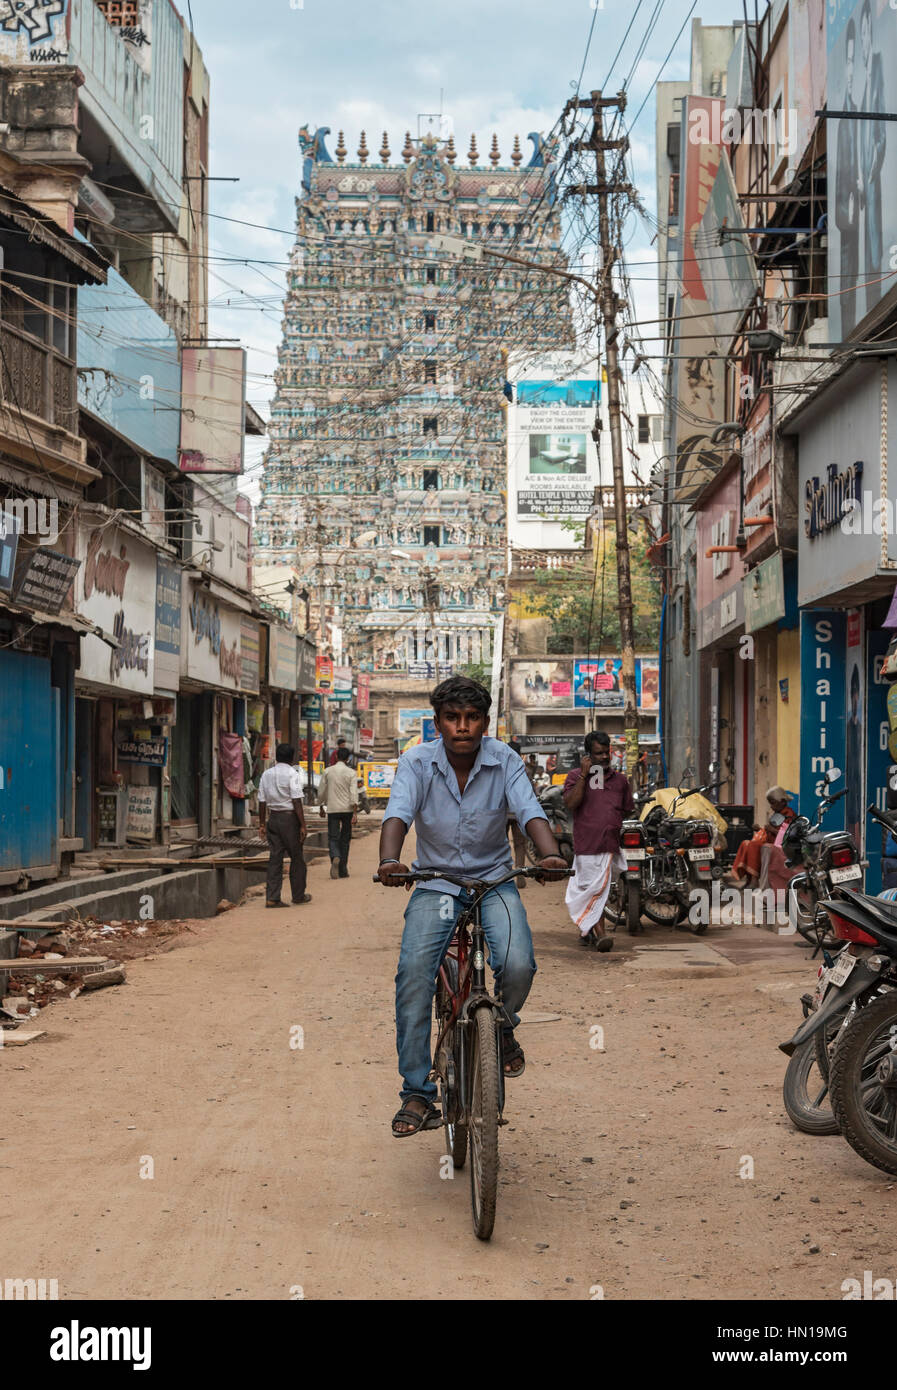 Cyclist in front of West Tower of Meenakshi Amman Temple, Madurai, Tamil Nadu, India Stock Photo